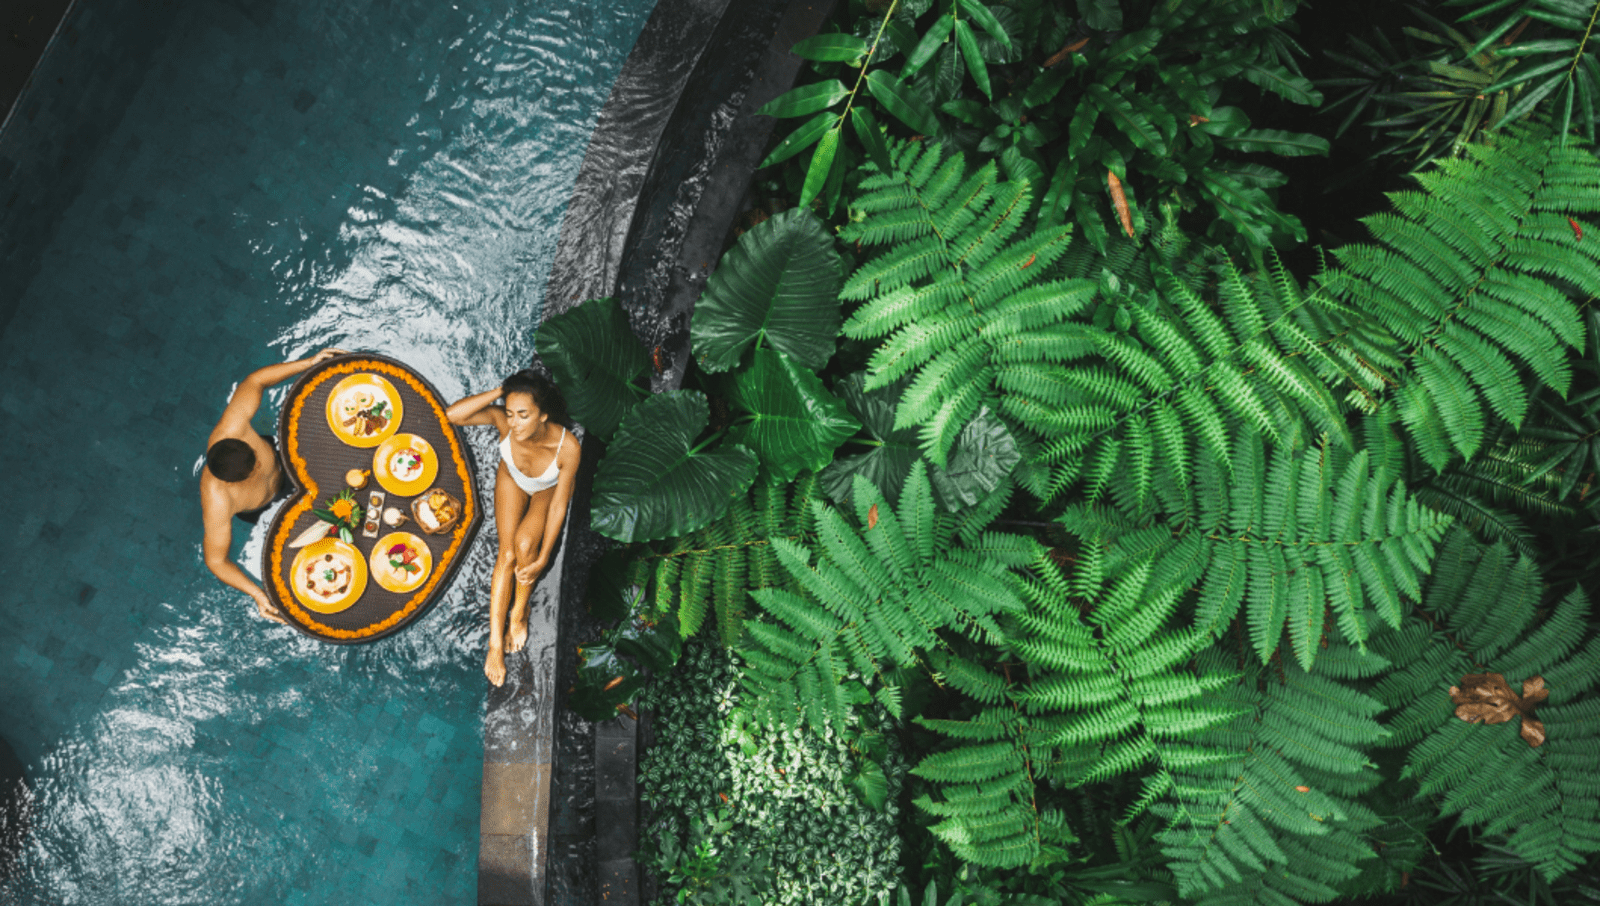 Couple in pool with lush garden with a floating tray full of food in pool